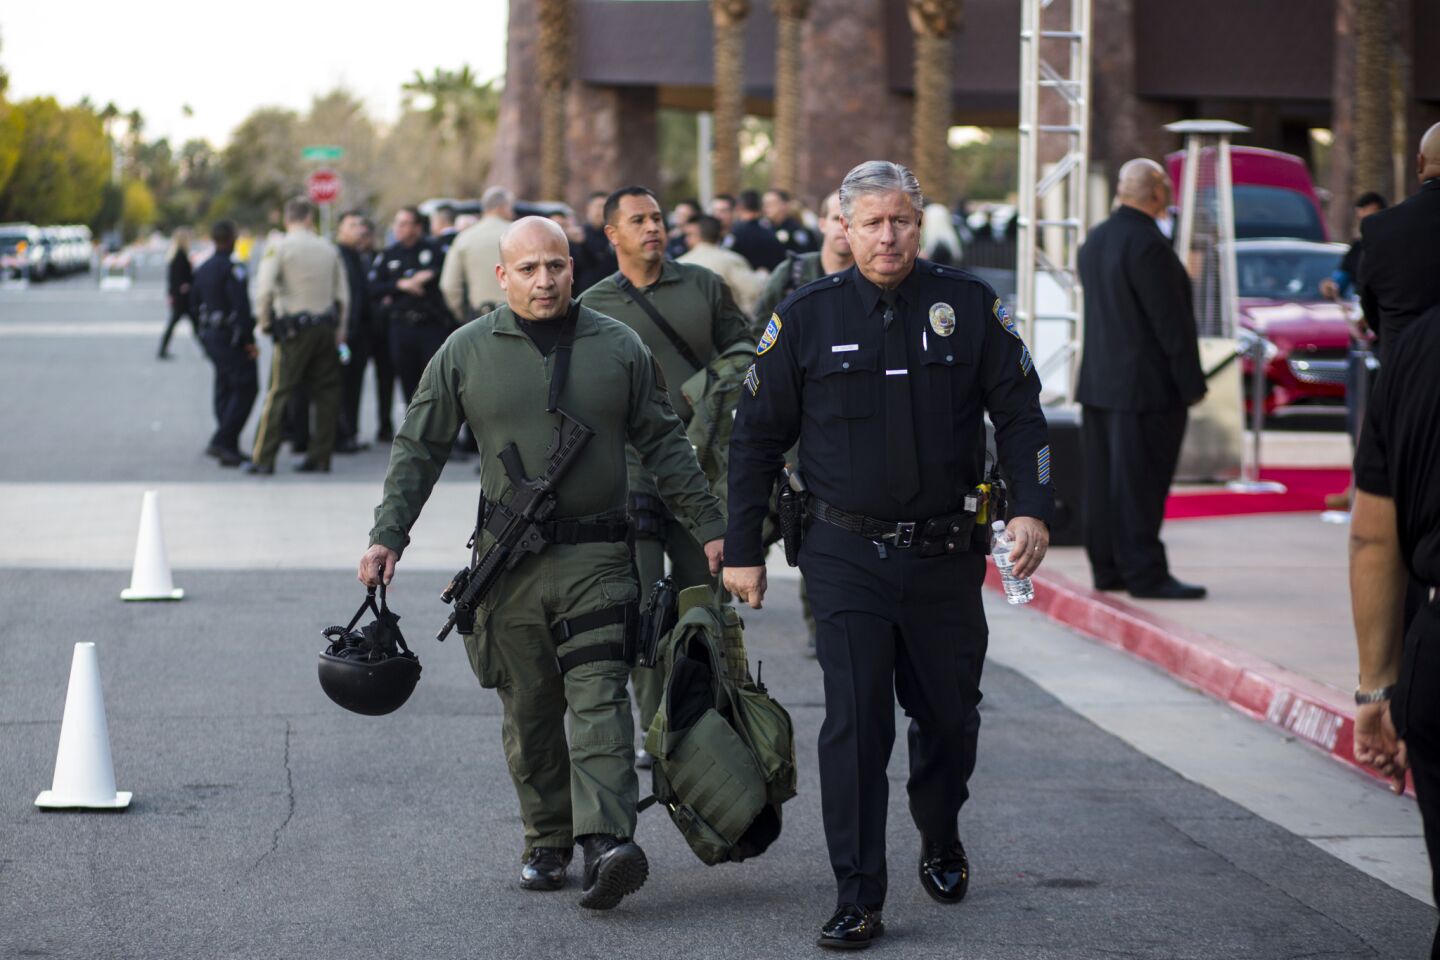 Security outside the Palm Springs Convention Center before the start of the 2016 Palm Springs International Film Festival Awards Gala in Palm Springs.